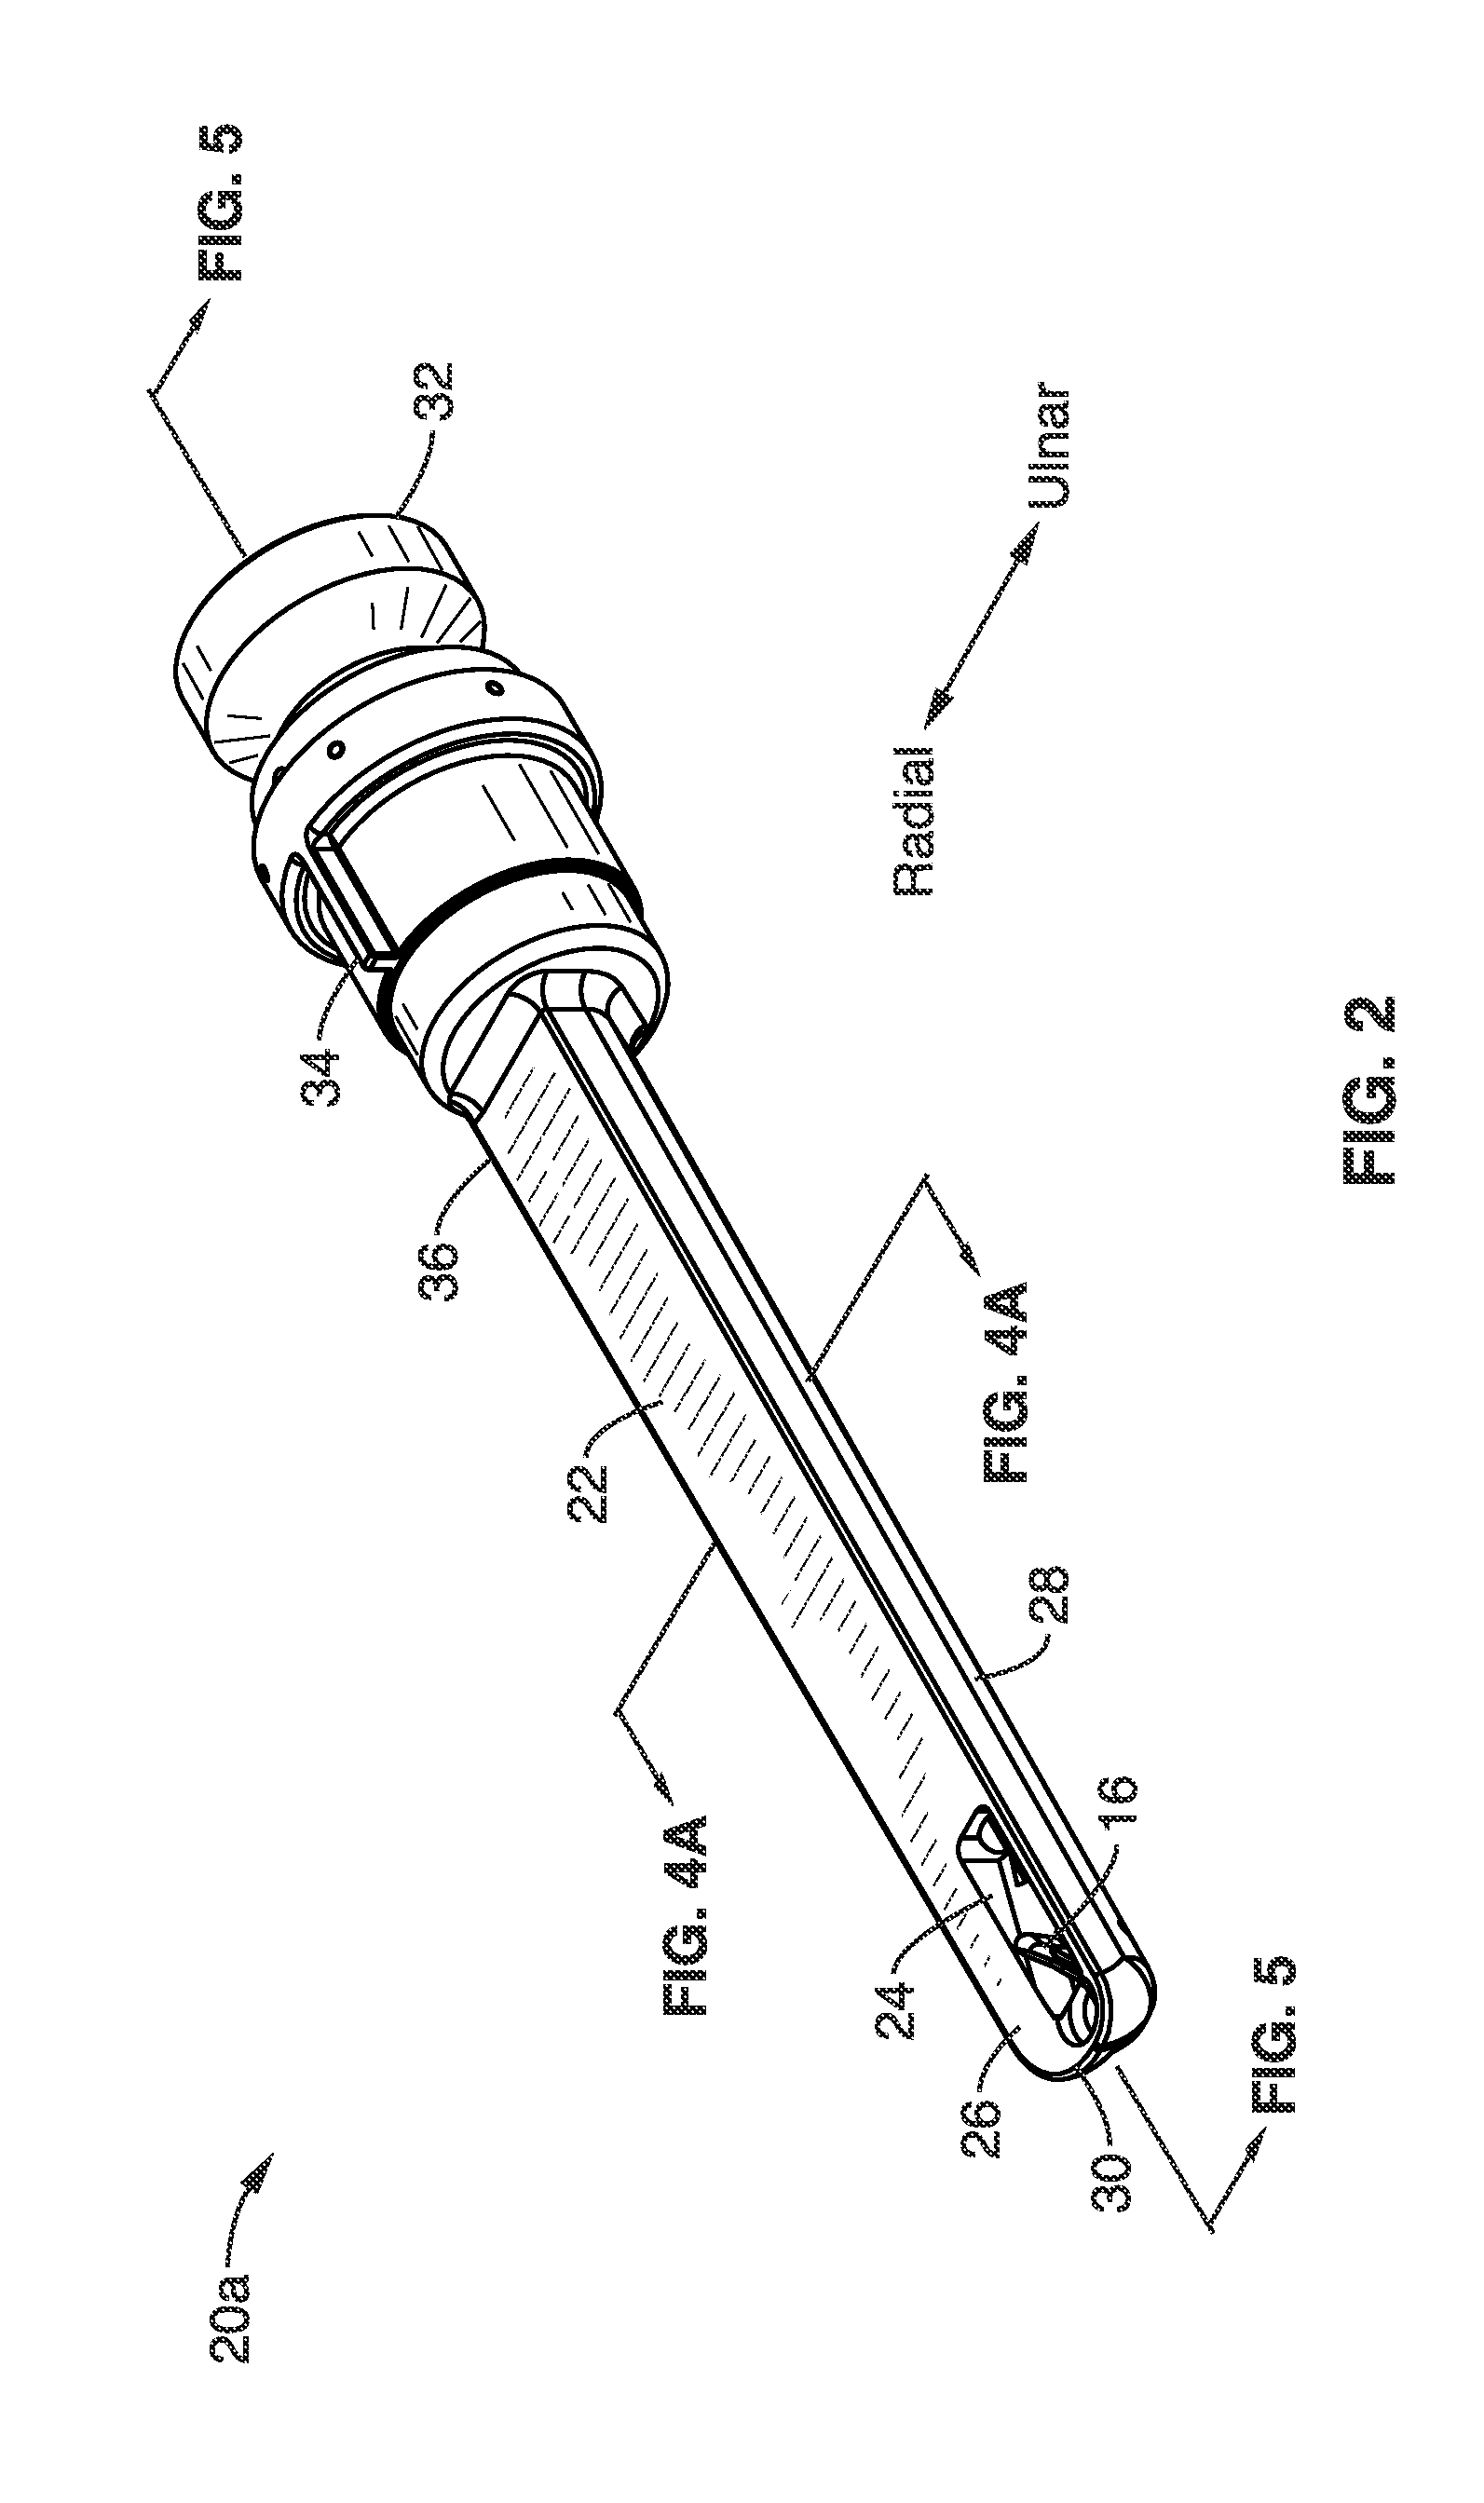 Method and apparatus for treatment of CTS using endoscopic carpal tunnel release